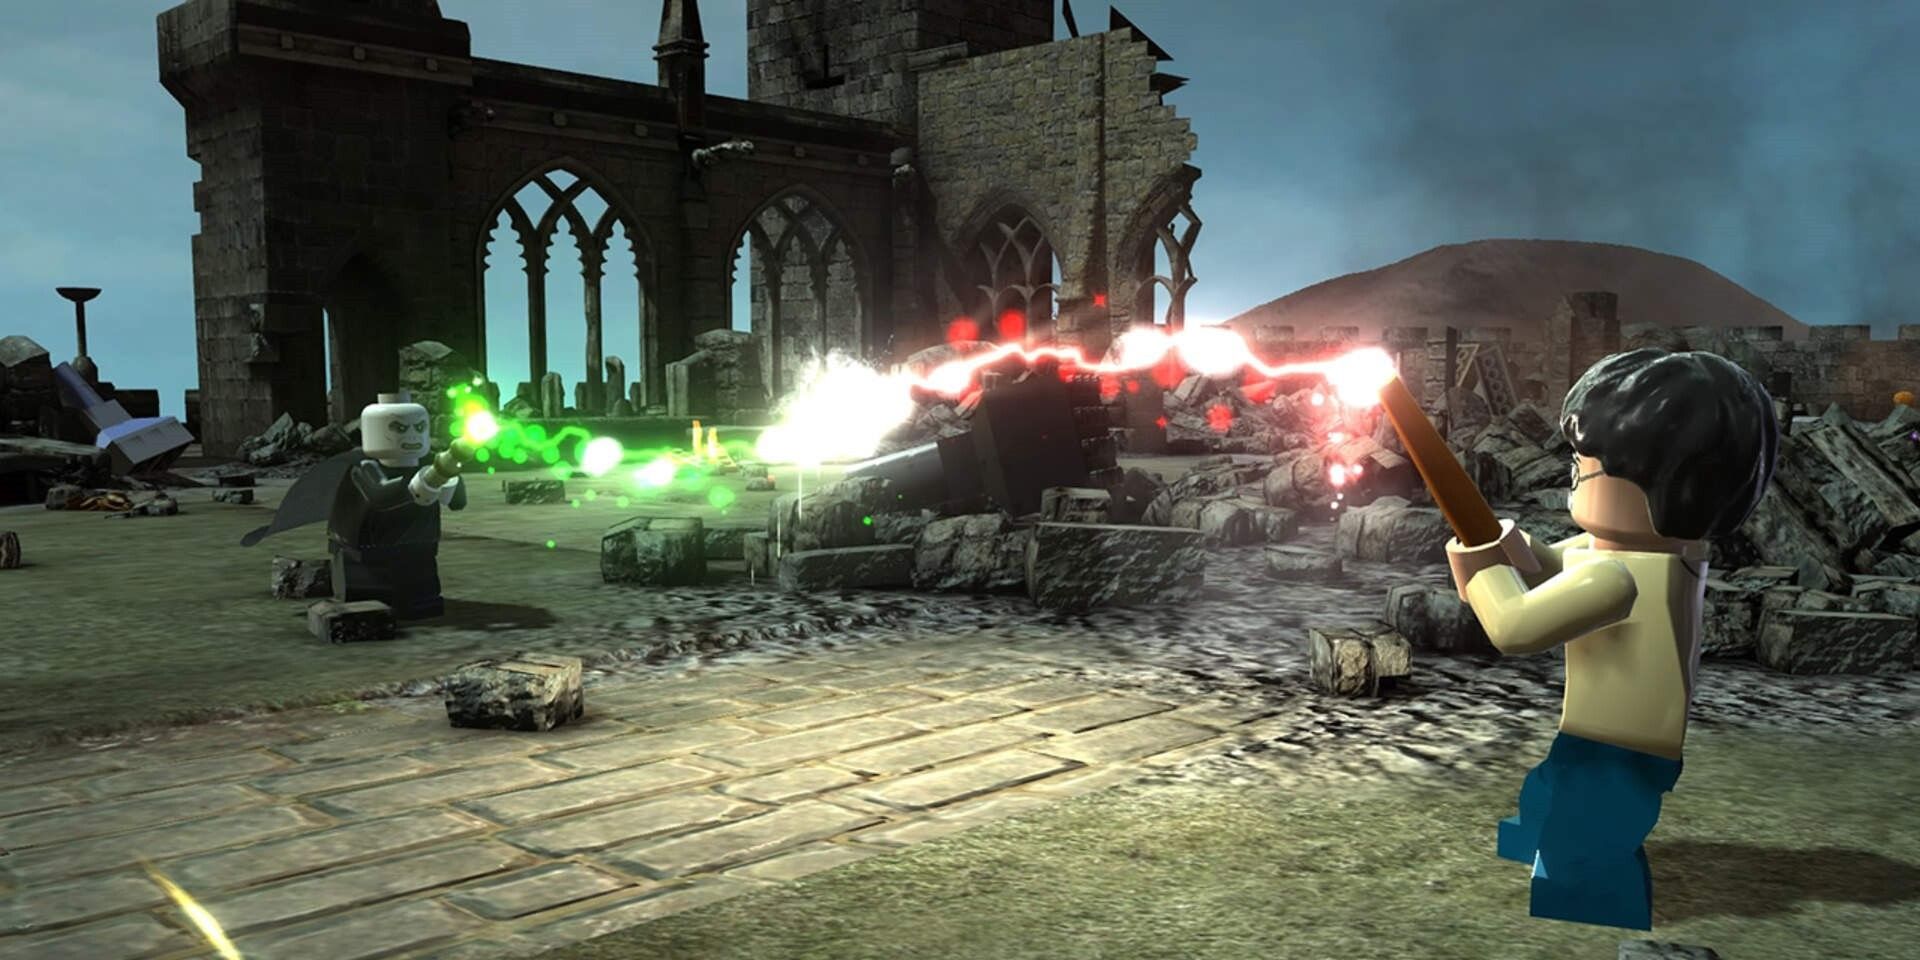 11 Best Harry Potter Video Games Of All Time Ranked By Metacritic